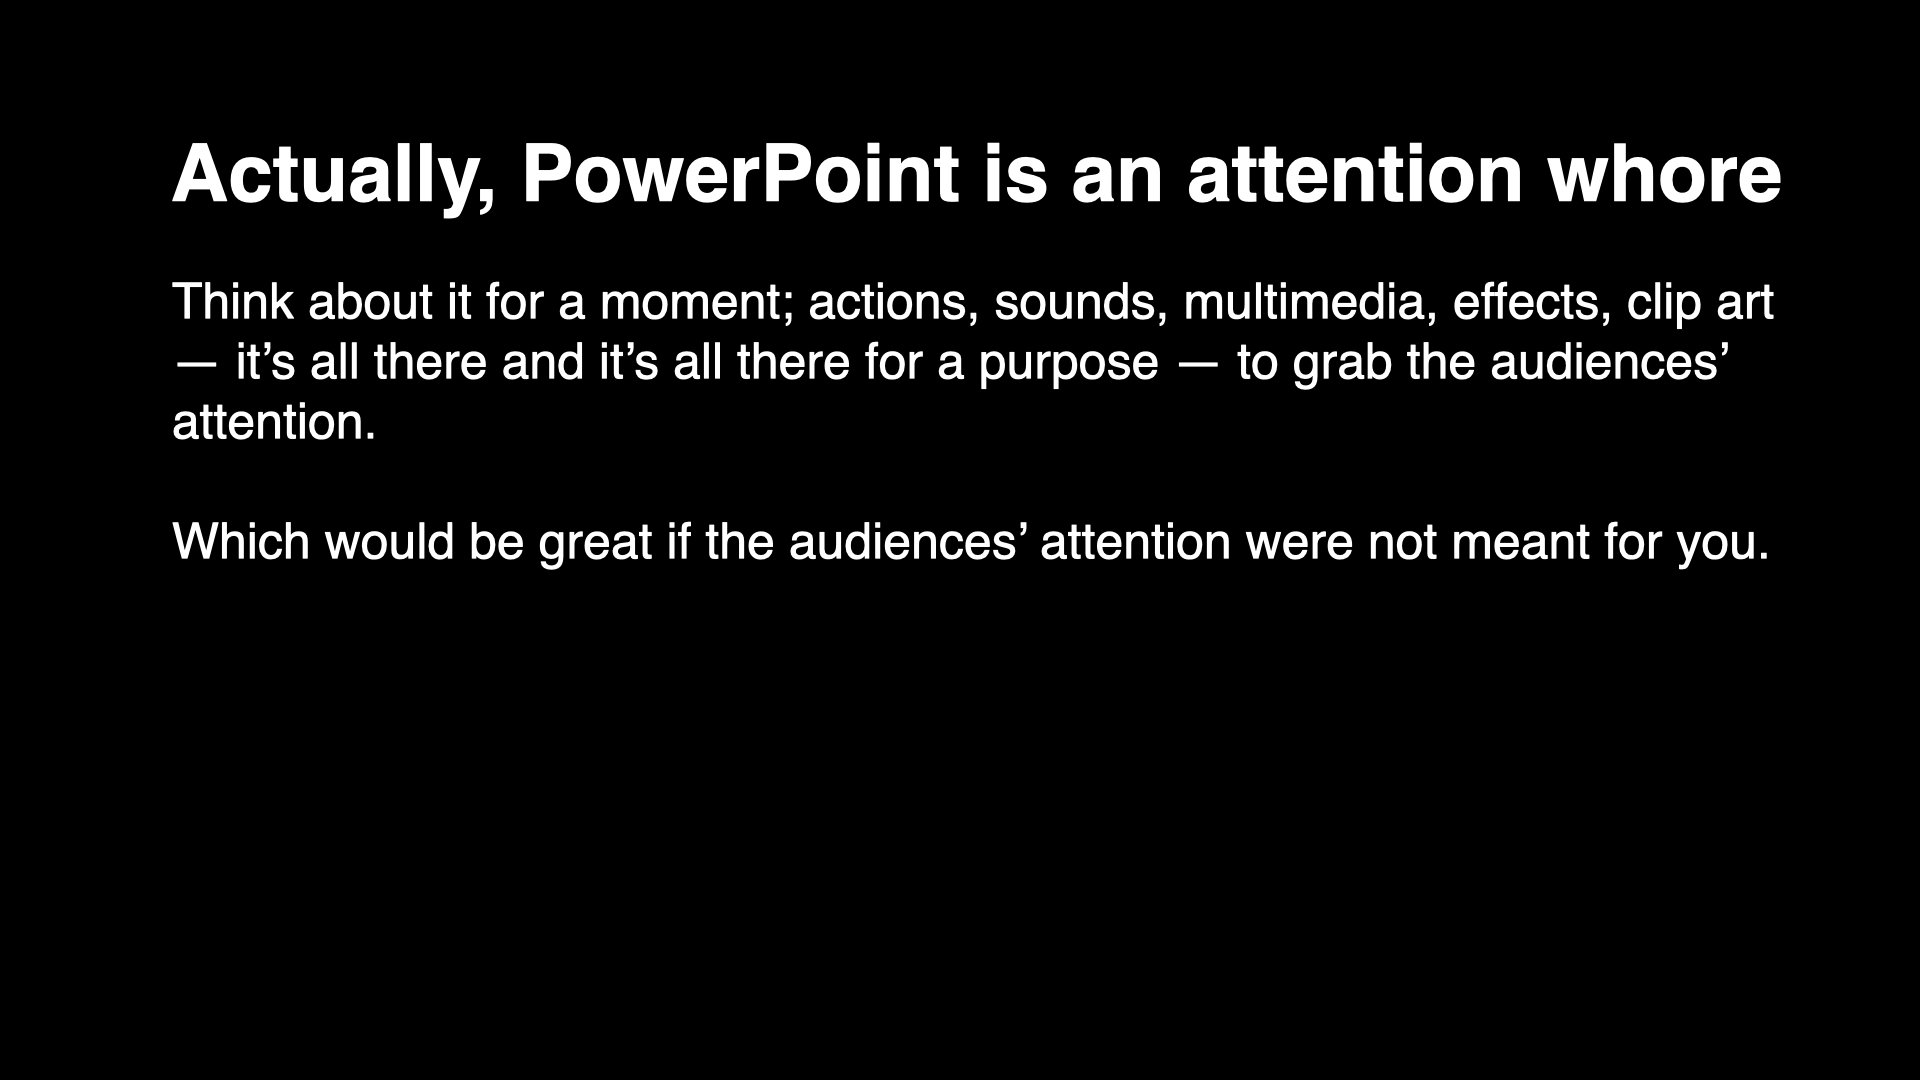 PowerPoint is the competition.003.jpeg